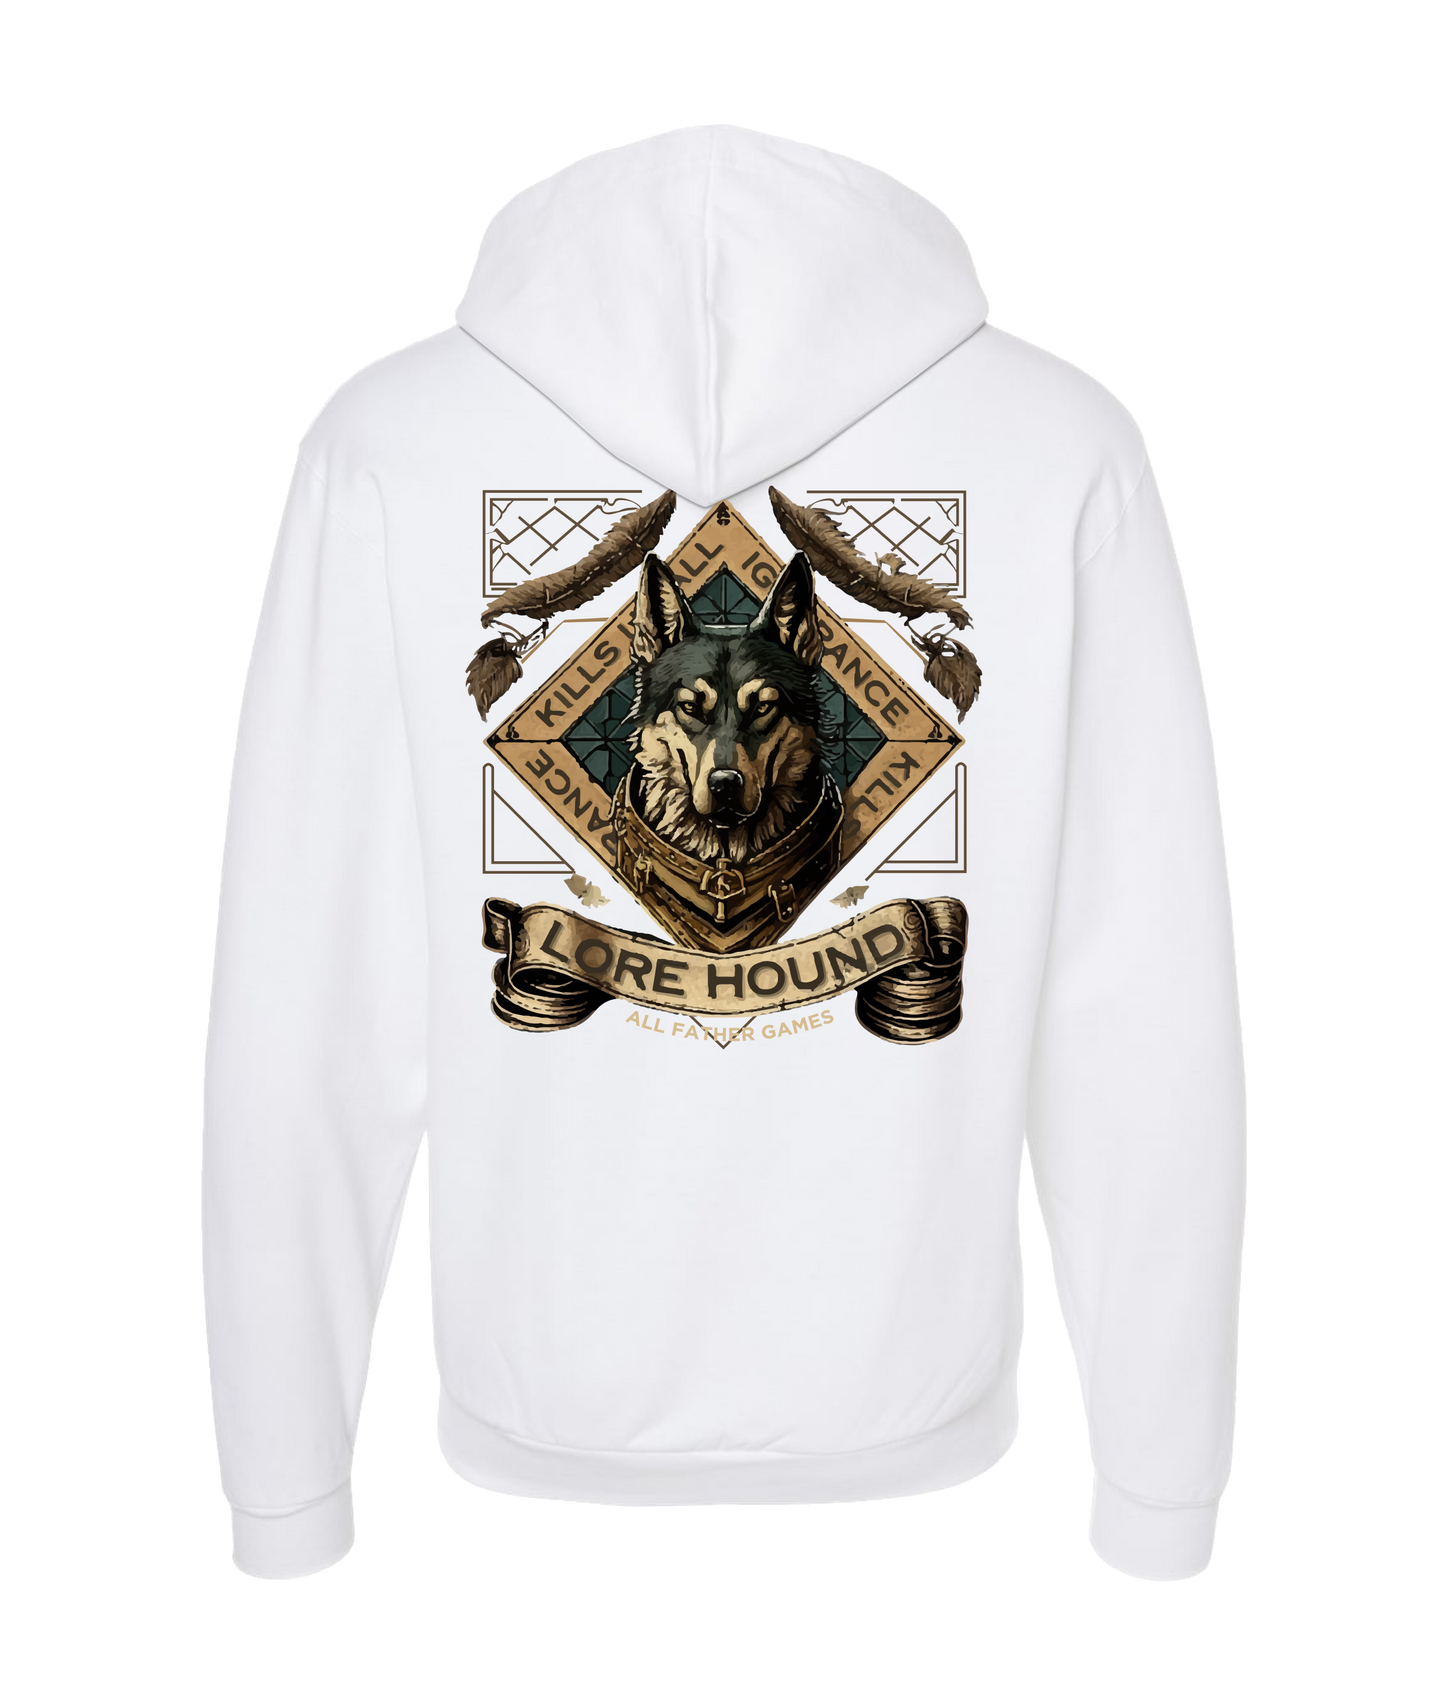 All Father Games - LORE HOUND - White Zip Up Hoodie